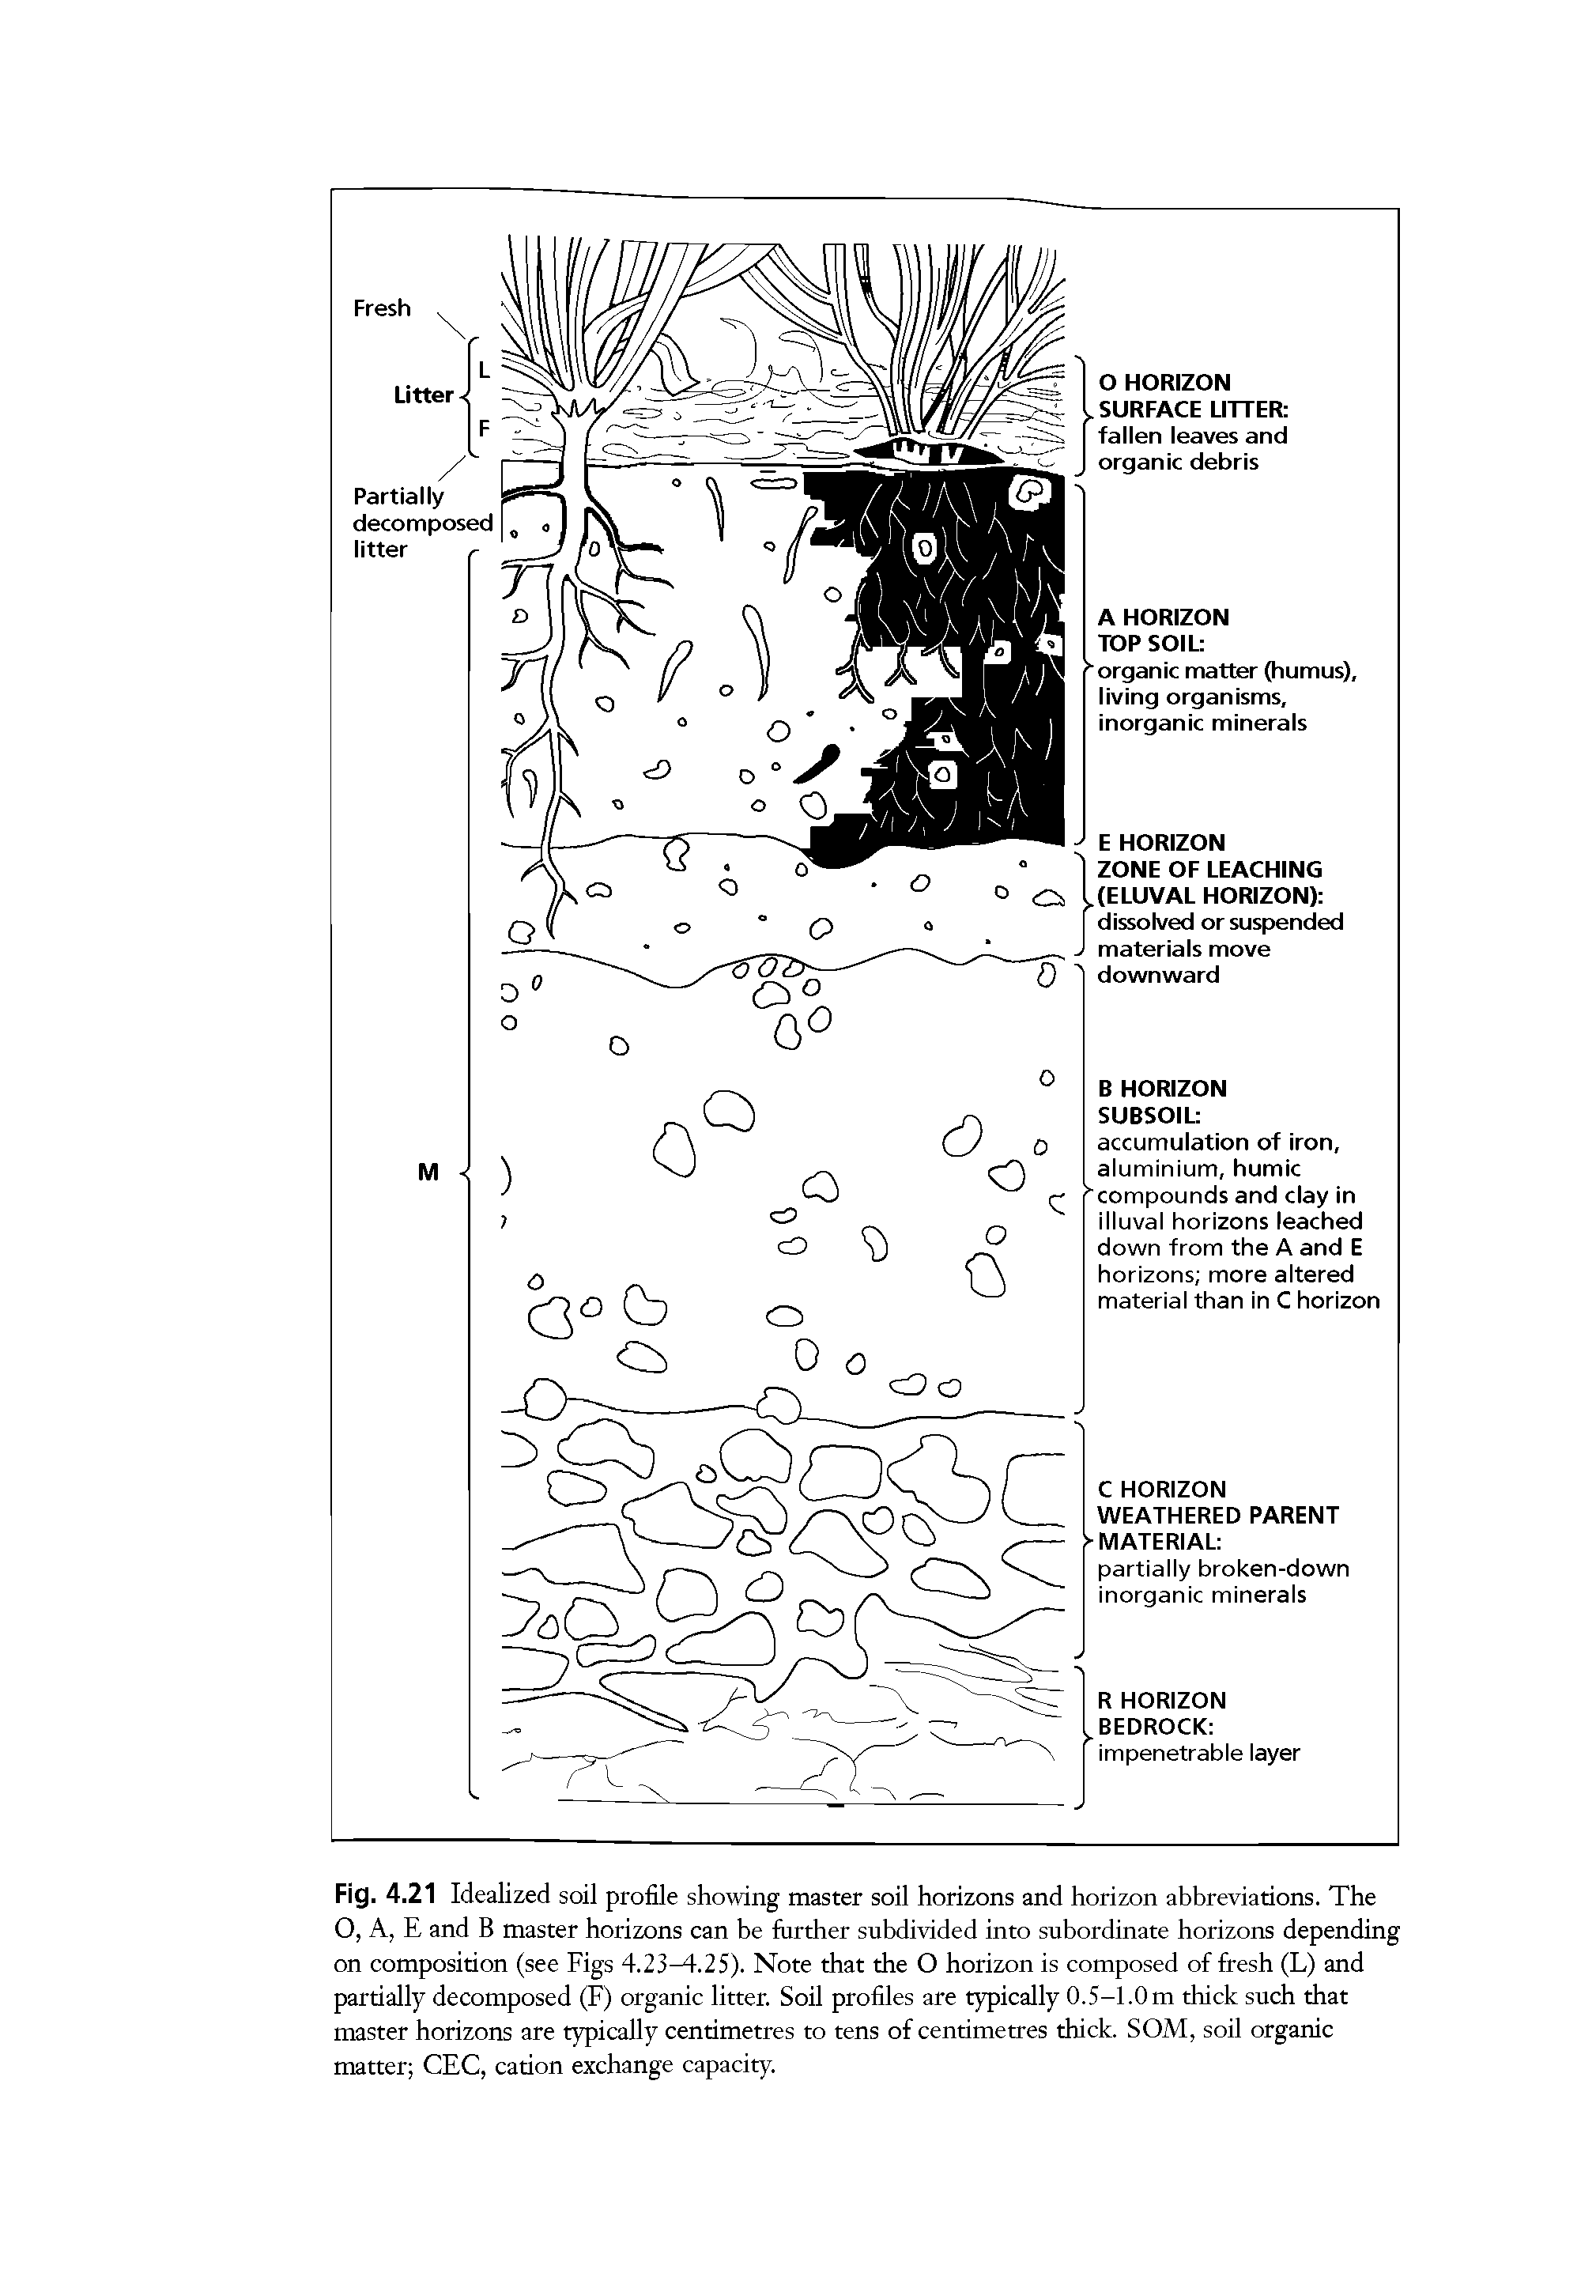 Fig. 4.21 Idealized soil profile showing master soil horizons and horizon abbreviations. The 0, A, E and B master horizons can be further subdivided into subordinate horizons depending on composition (see Figs 4.23M-.25). Note that the O horizon is composed of fresh (L) and partially decomposed (F) organic litter. Soil profiles are typically 0.5-1.0m thick such that master horizons are typically centimetres to tens of centimetres thick. SOM, soil organic matter CEC, cation exchange capacity.